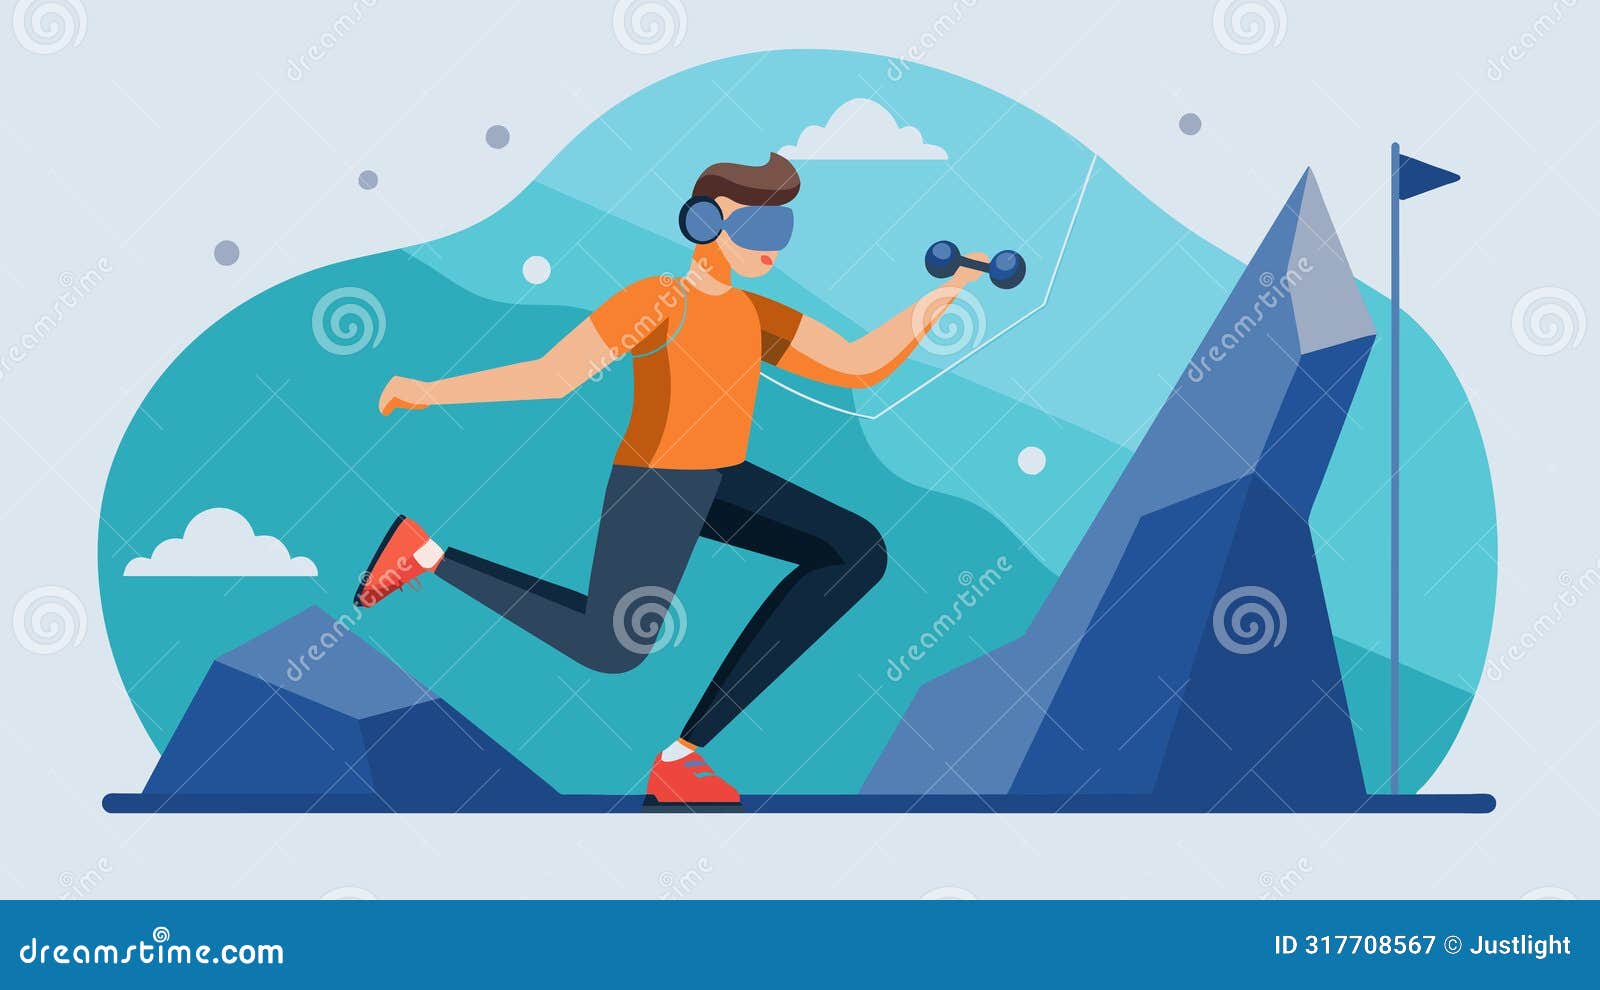 using vr technology a person is able to simulate rock climbing challenging their strength flexibility and problemsolving